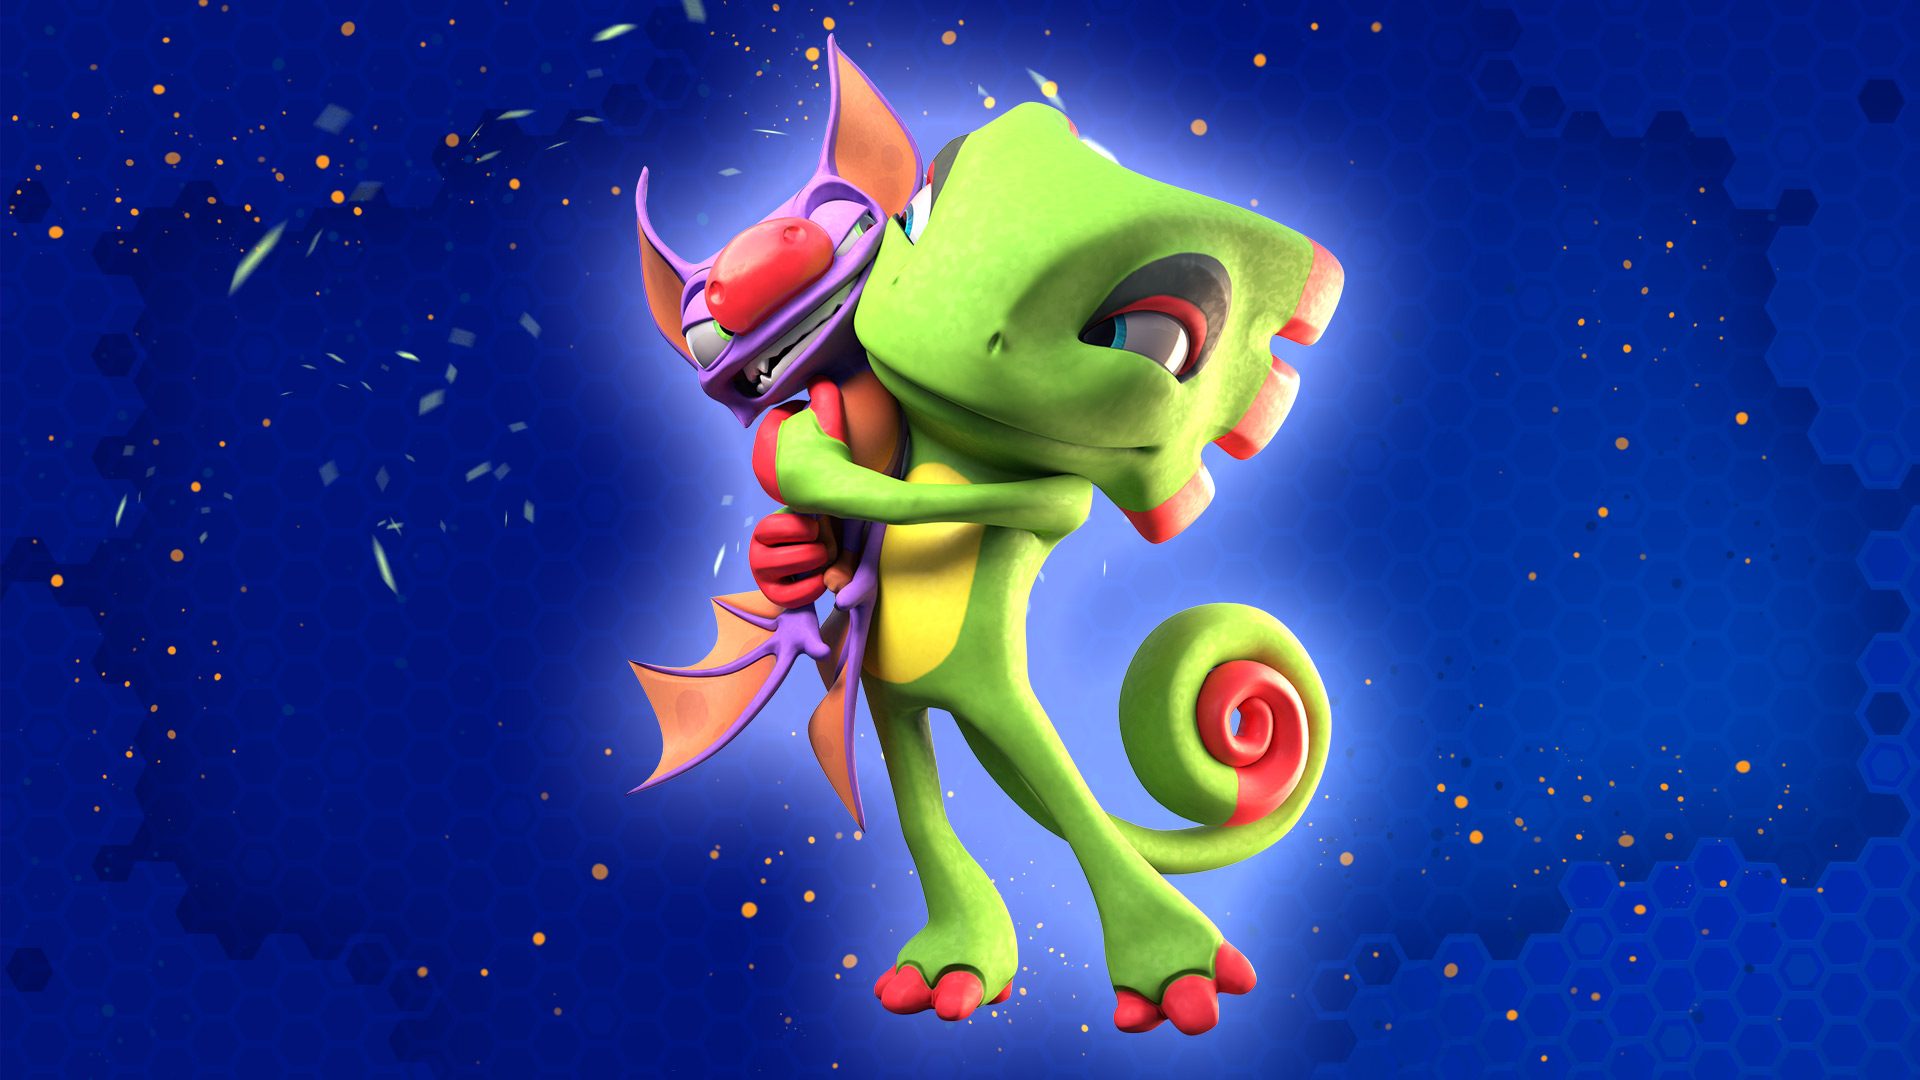 Showcase Yooka Laylee And The Impossible Lair